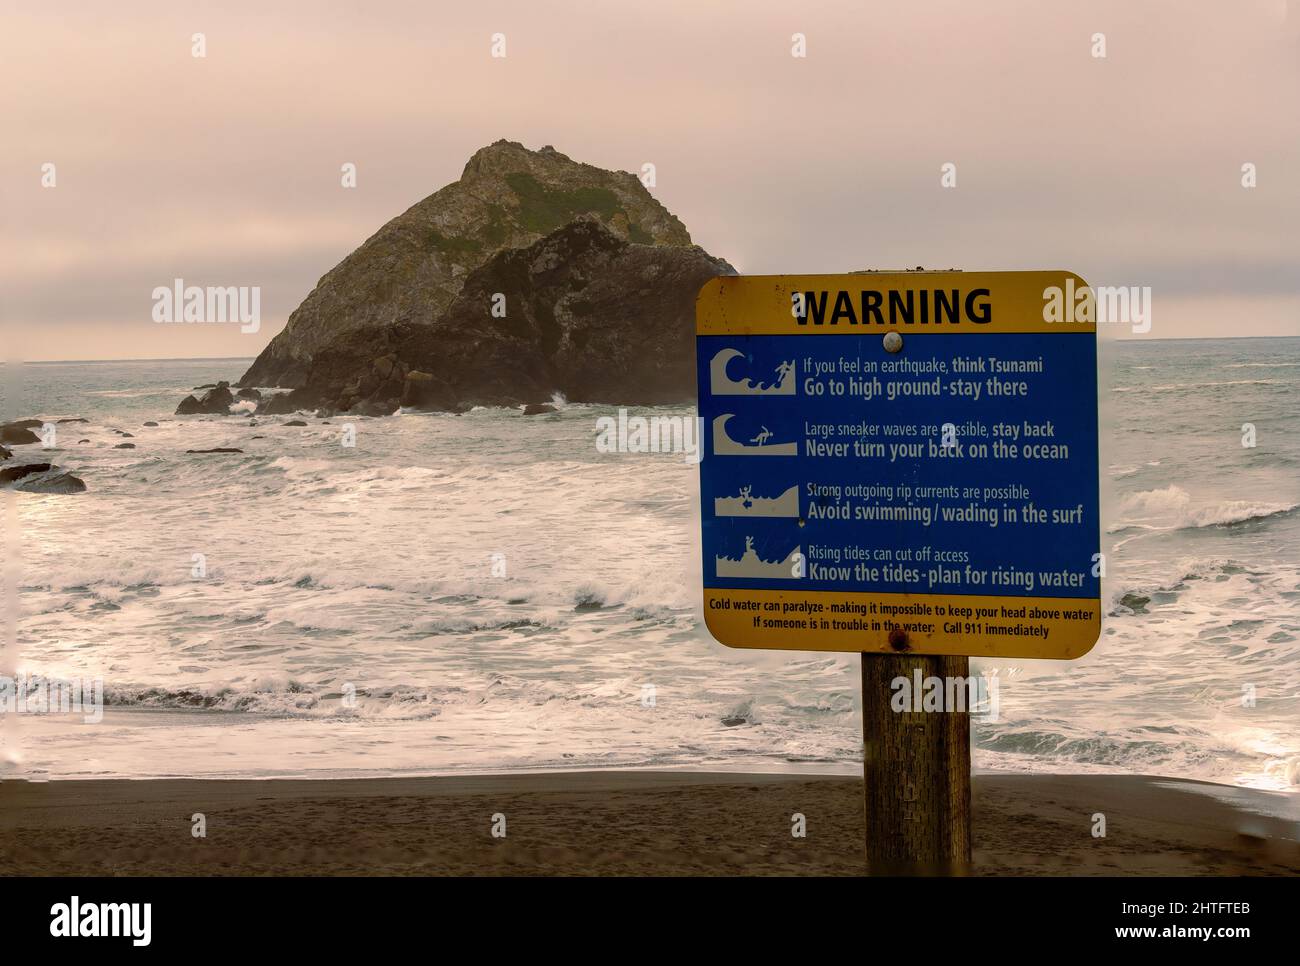 A sign on the California Pacific coast warns of tsunami dangers should an earthquake occur and gives safety instructions. Stock Photo